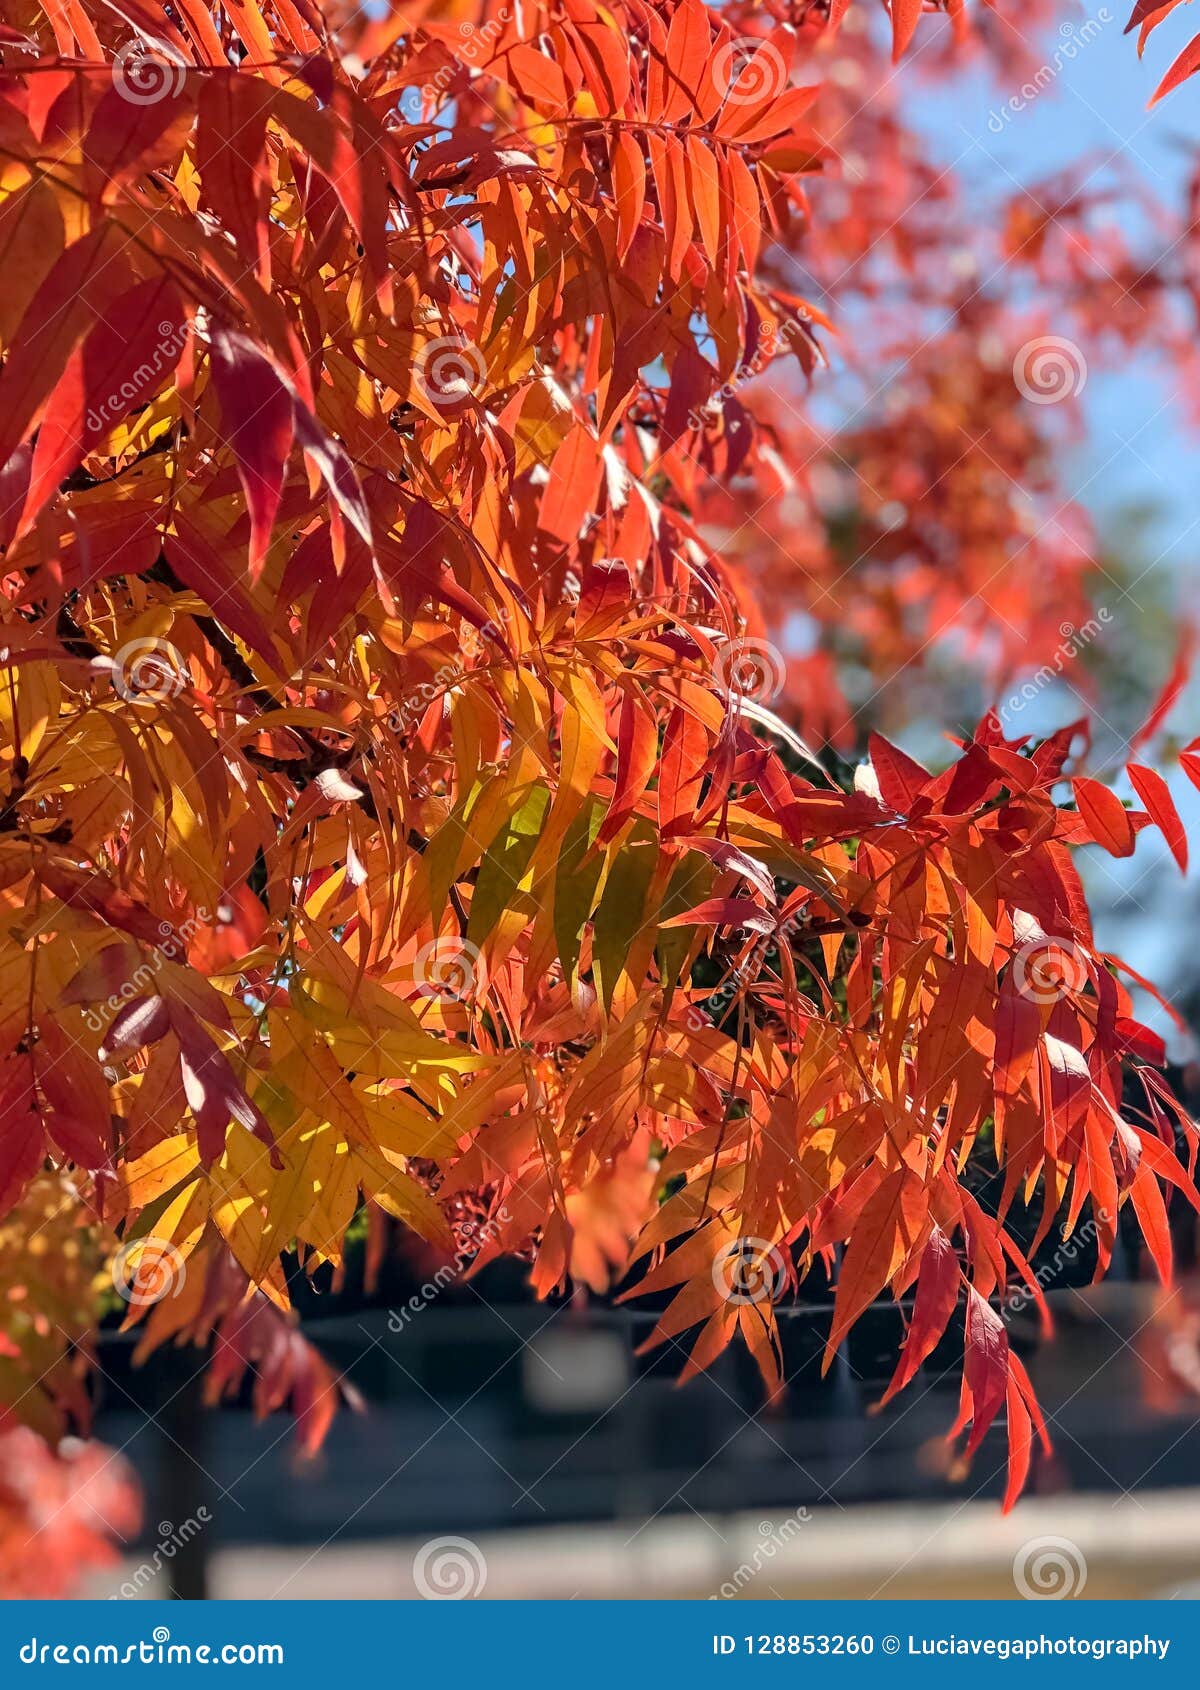 Why Do Leaves Turn Red in Autumn?